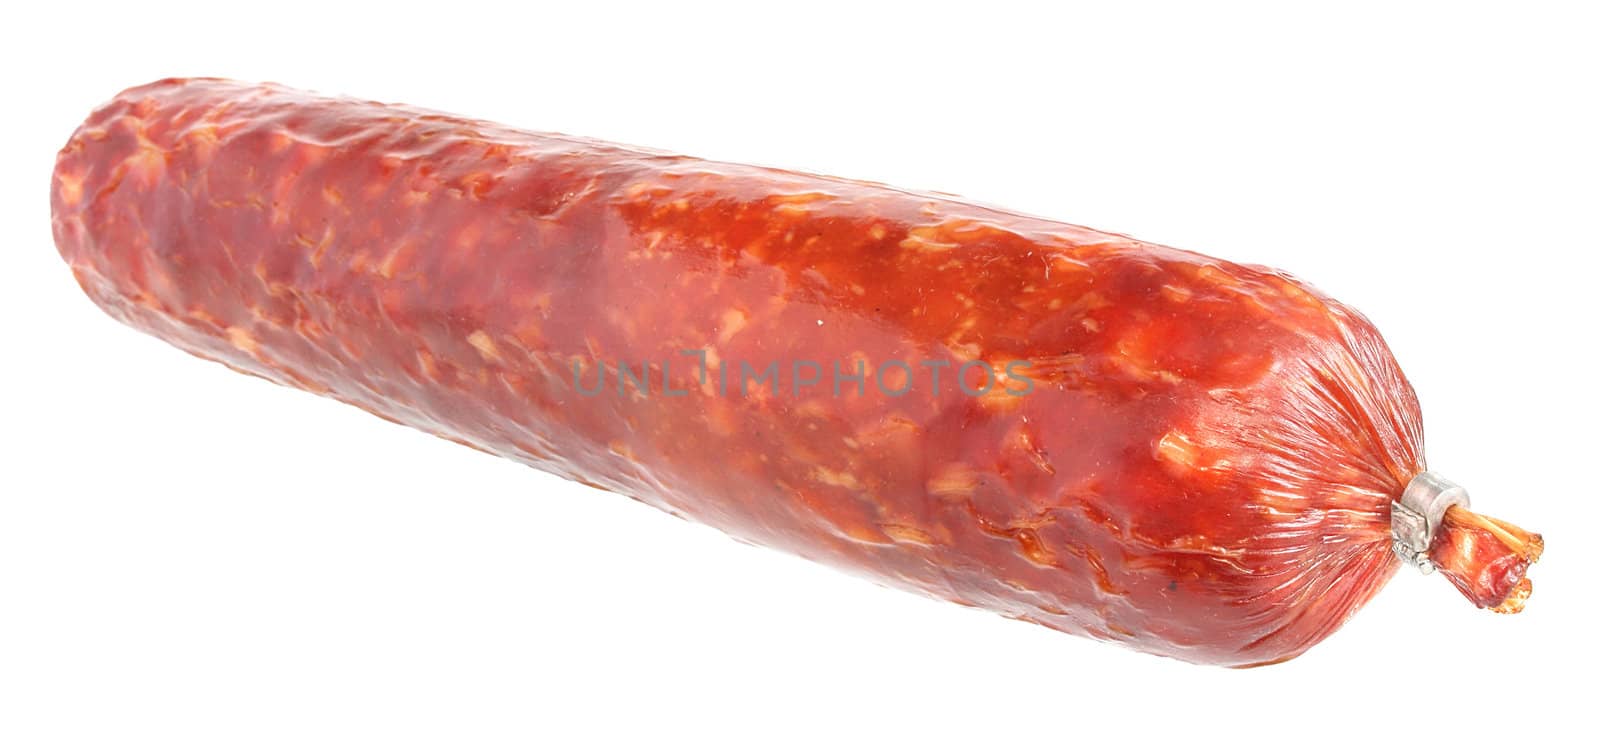 Sausage on a white background.